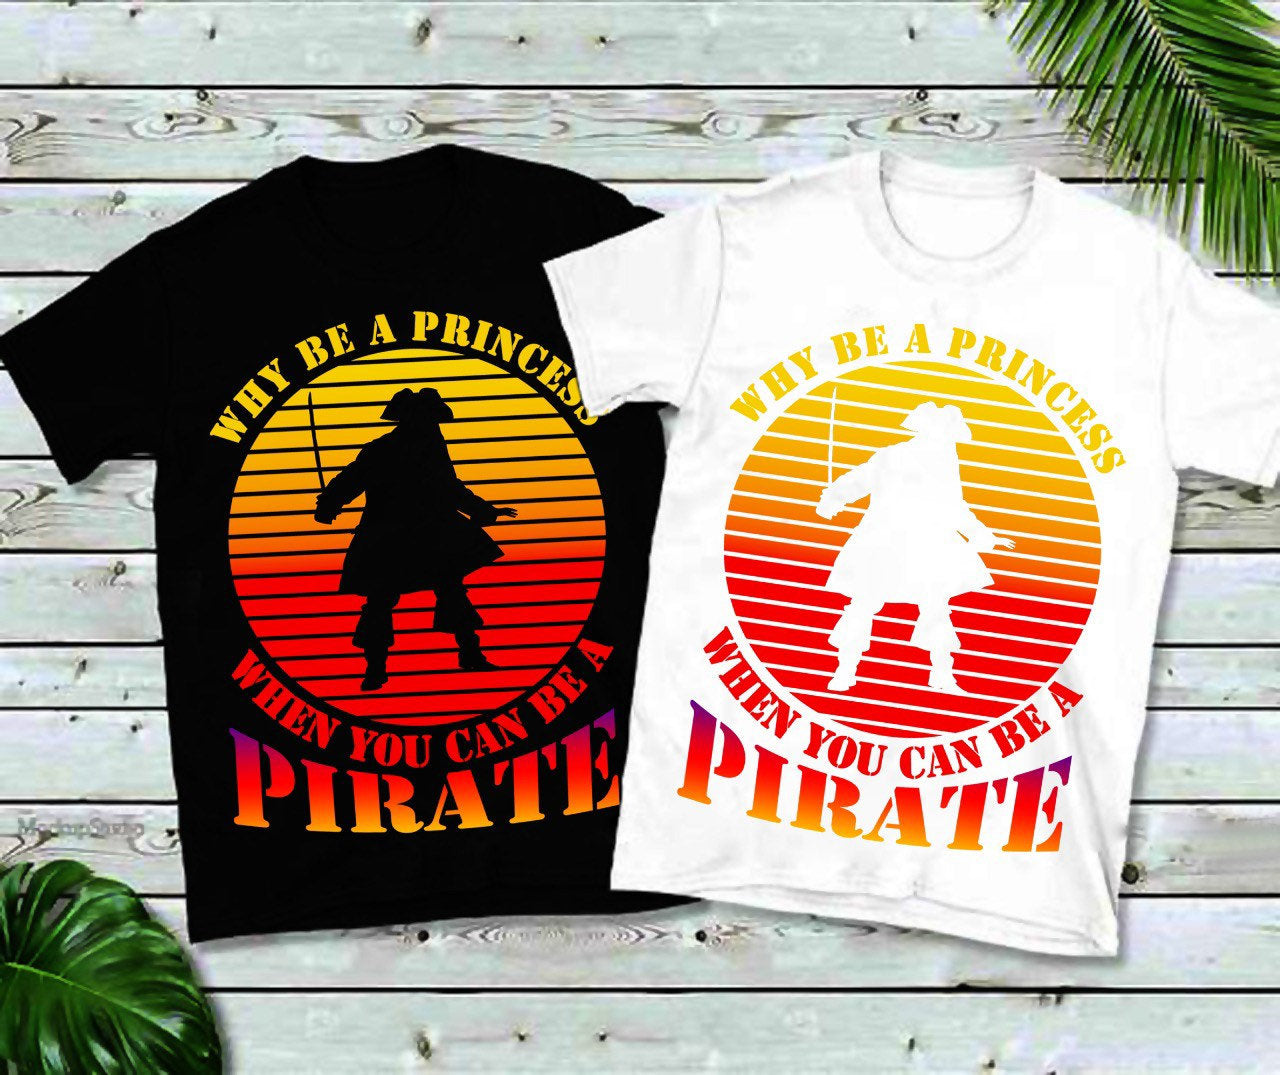 Why Be A Princess When You Can Be A Pirate | Retro Sunset T-Shirts, Pirate, Funny Pirate Shirt - plusminusco.com